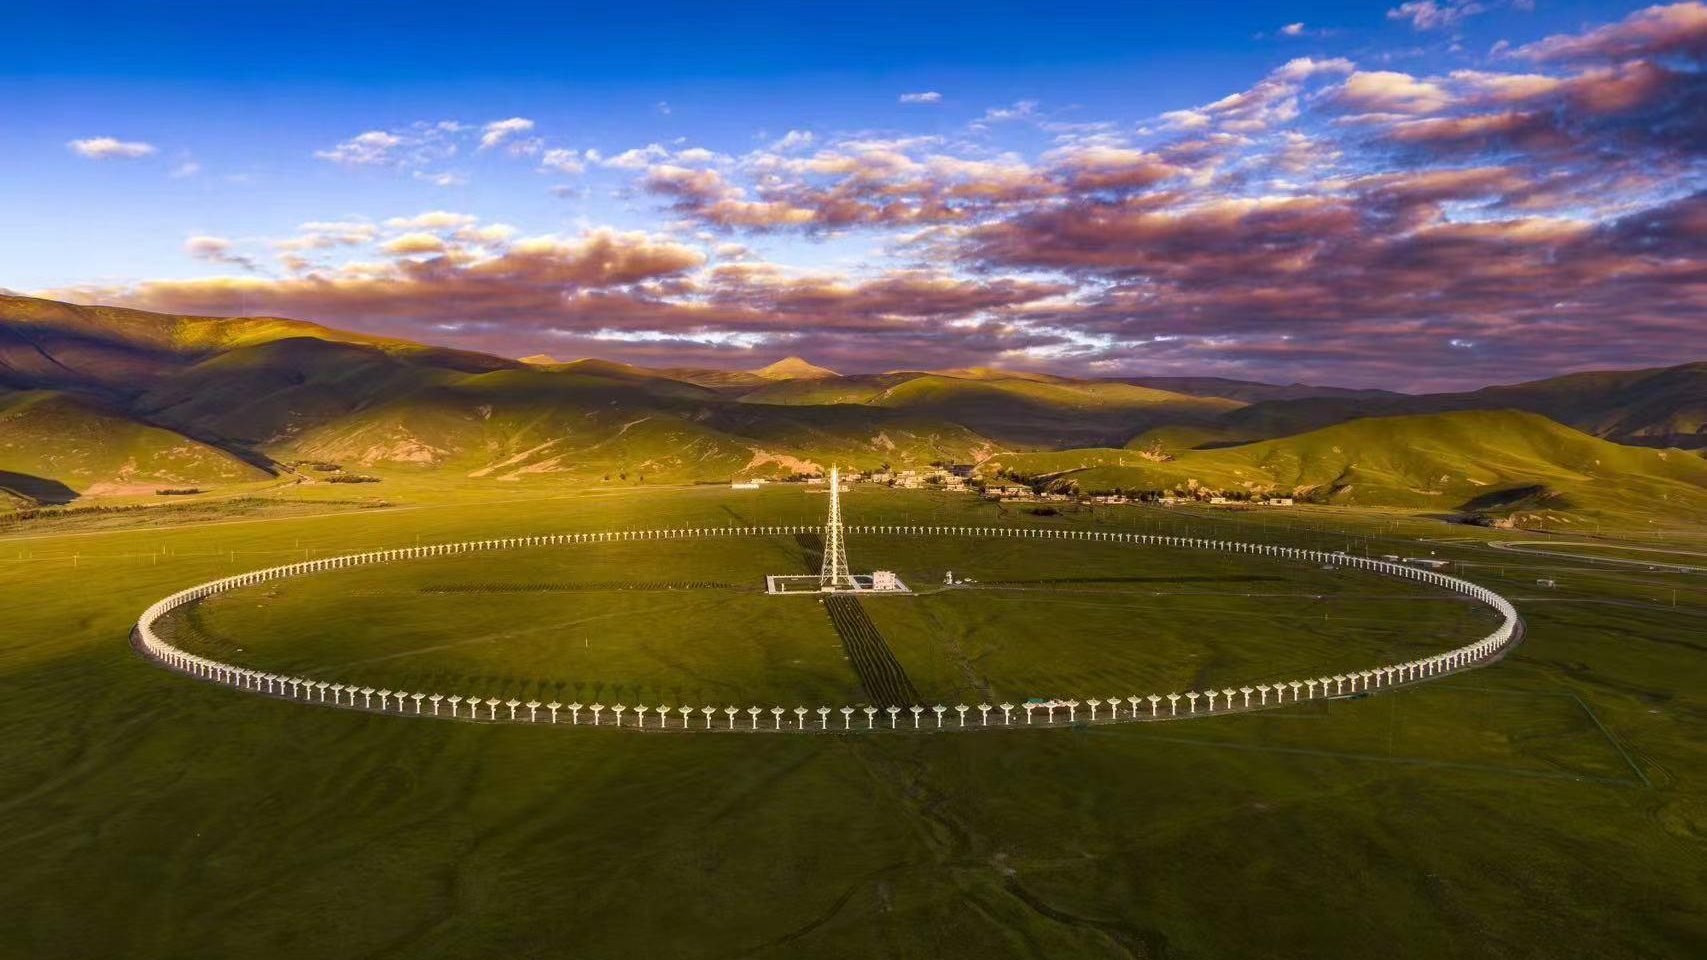 The Daocheng Solar Radio Telescope consists of 313 parabolic antennas, forming a large ring with a diameter of 1 kilometer. /CMG